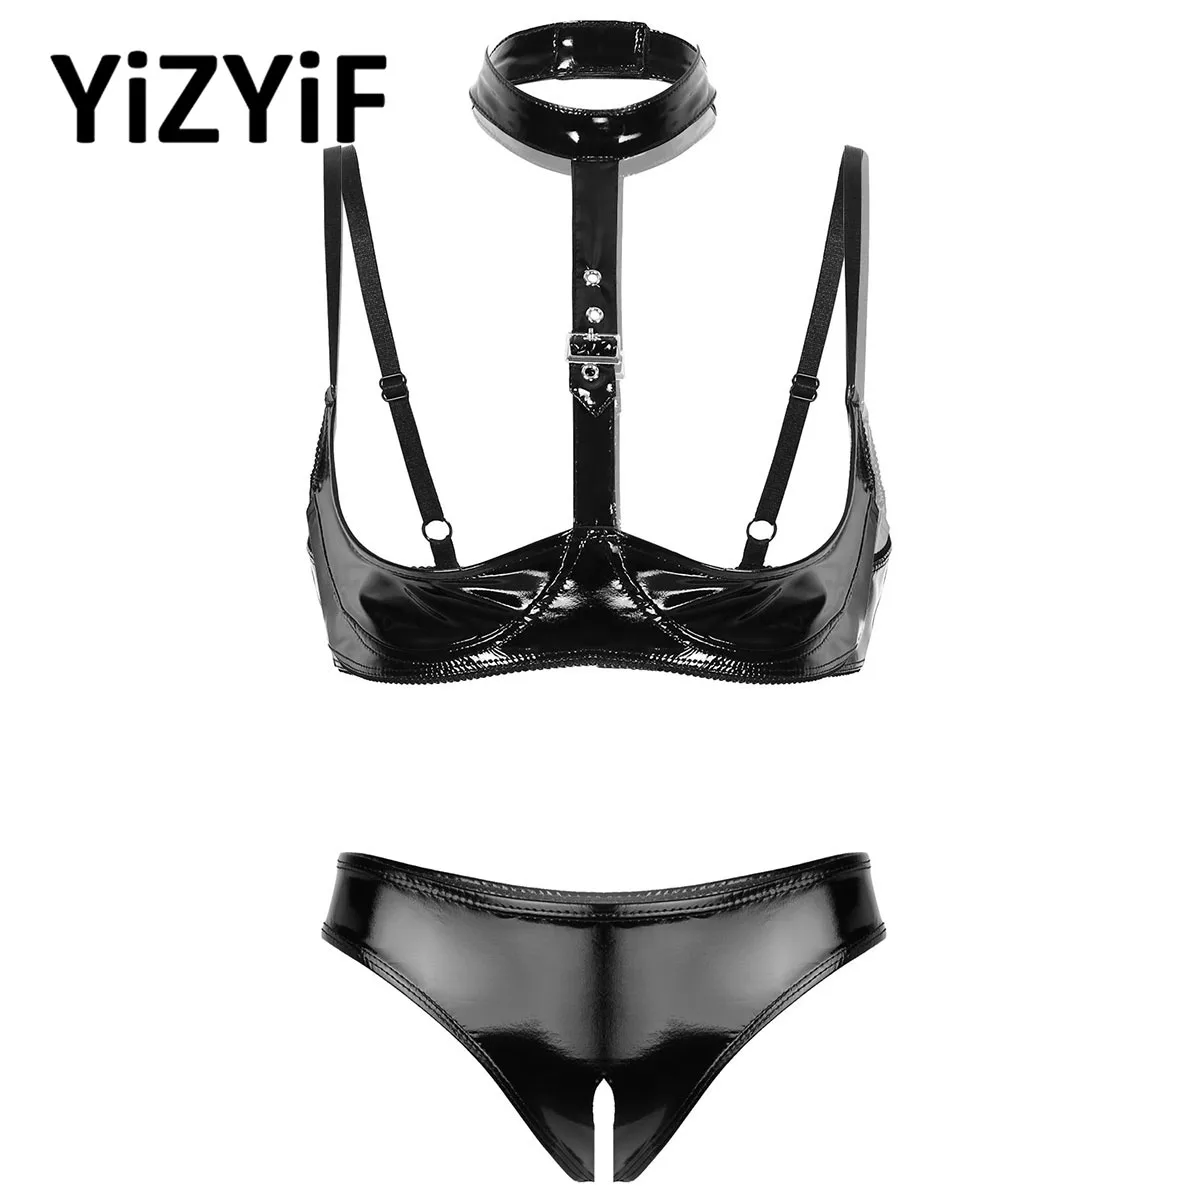 Womens Slutty Patent Leather Lingerie Set Black Buckle Halter Wetlook Latex Wire-free Open Cup Bra Top Exposed Breasts Bralette